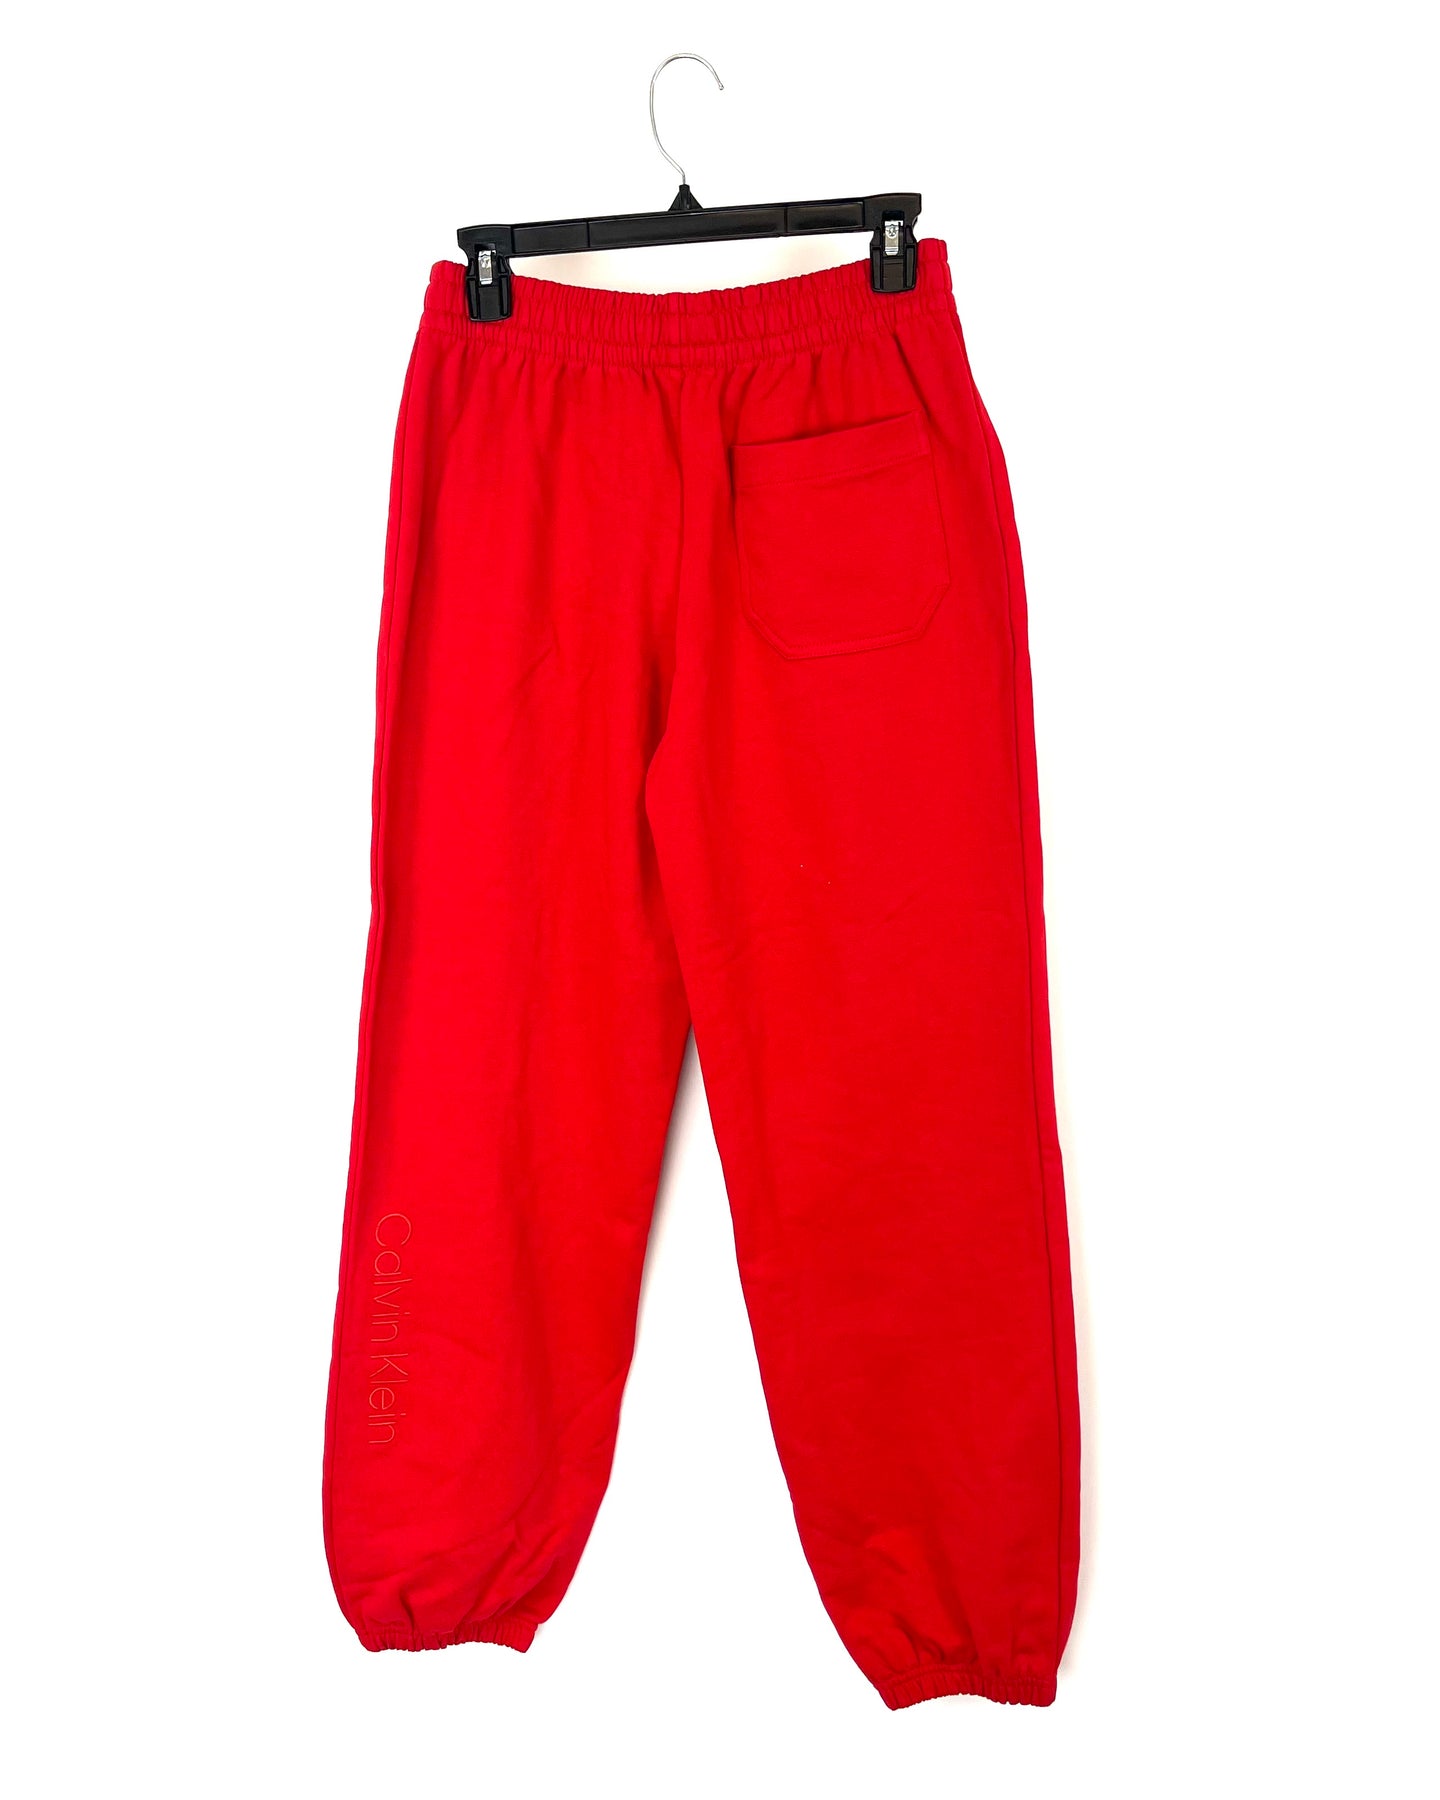 Calvin Klein Red Athletic Sweatpants - Small – The Fashion Foundation